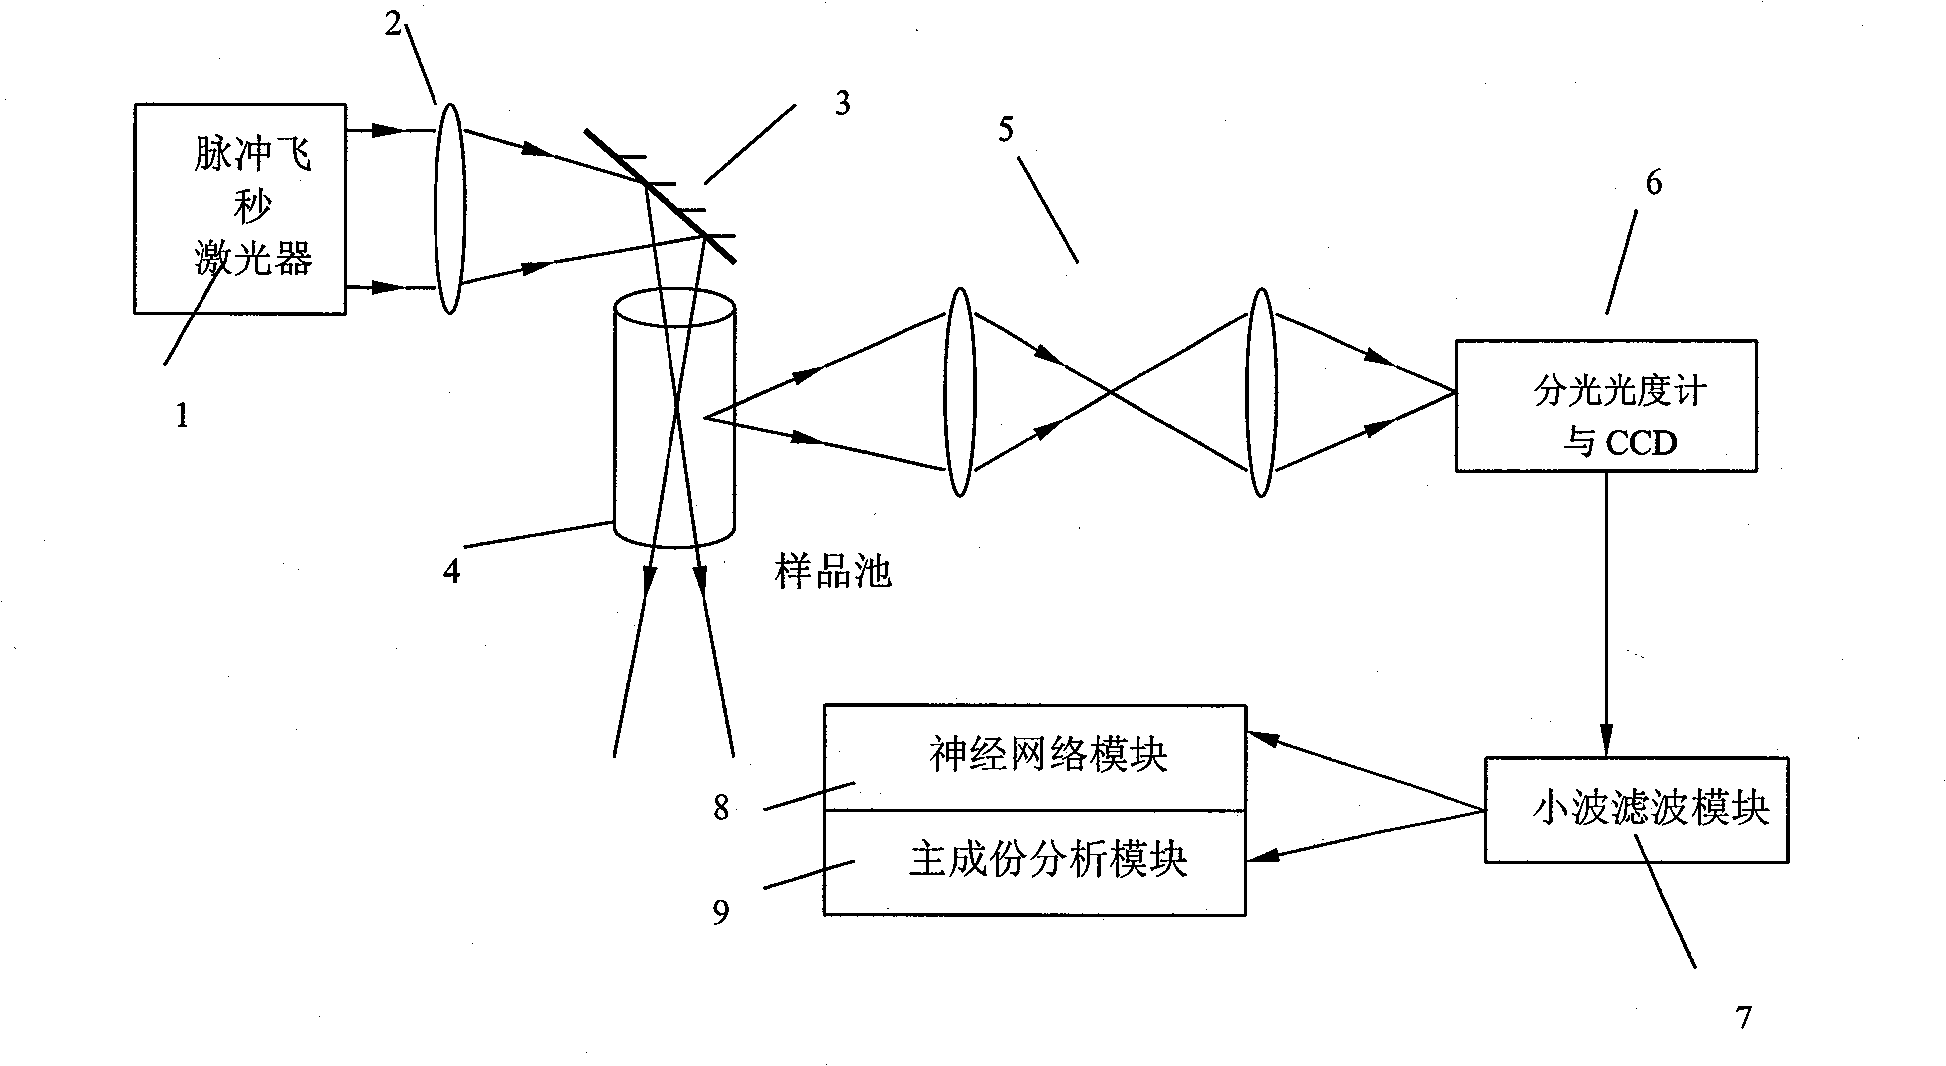 Atmospheric environment pollution monitoring system and detection method